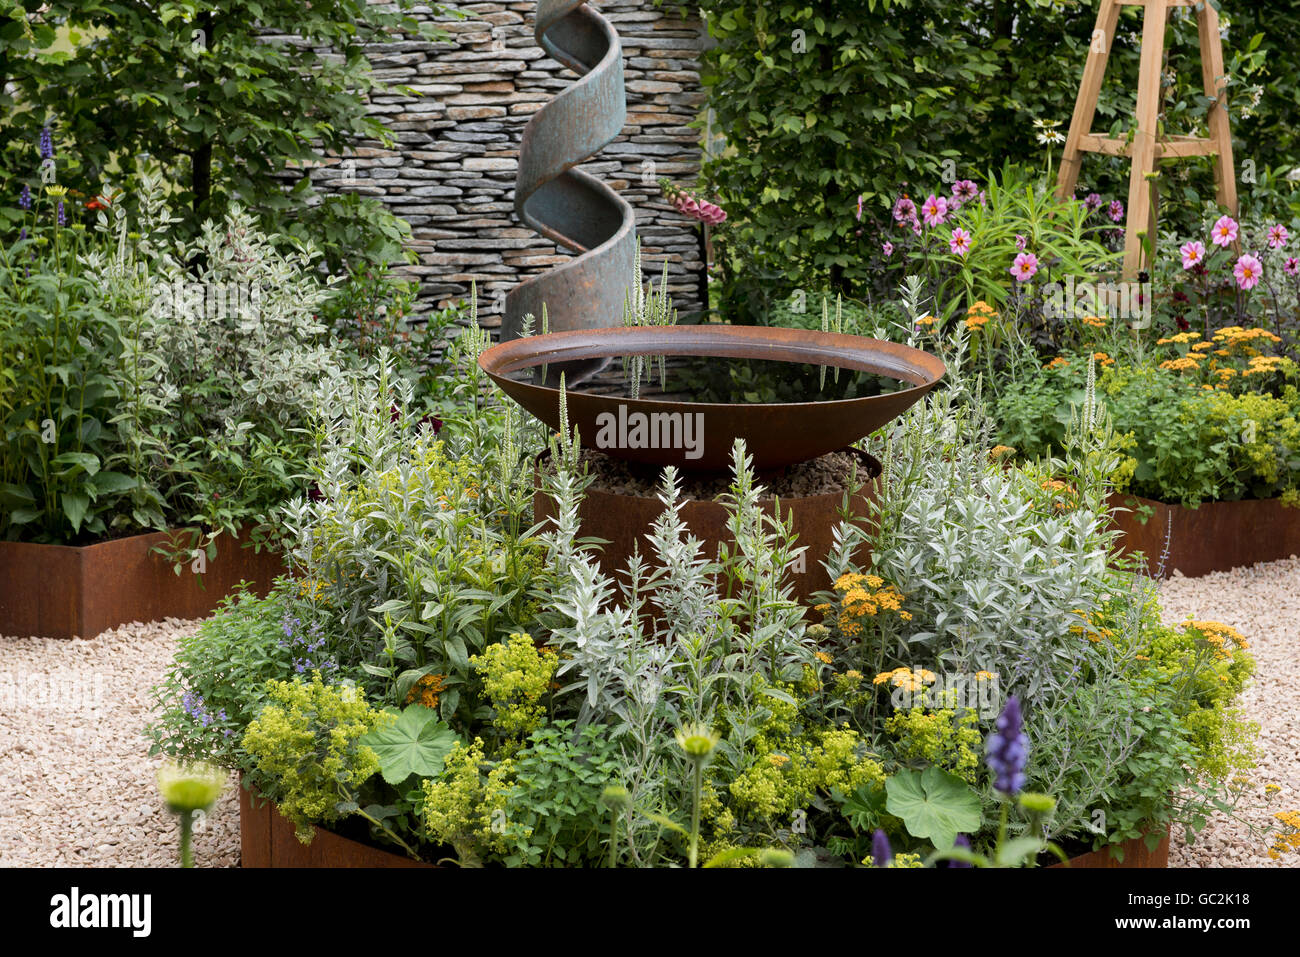 Naturalistic planting around a metal water feature in the A Summer Retreat Garden at The Hampton Court Palace Flower Show 2016, Stock Photo